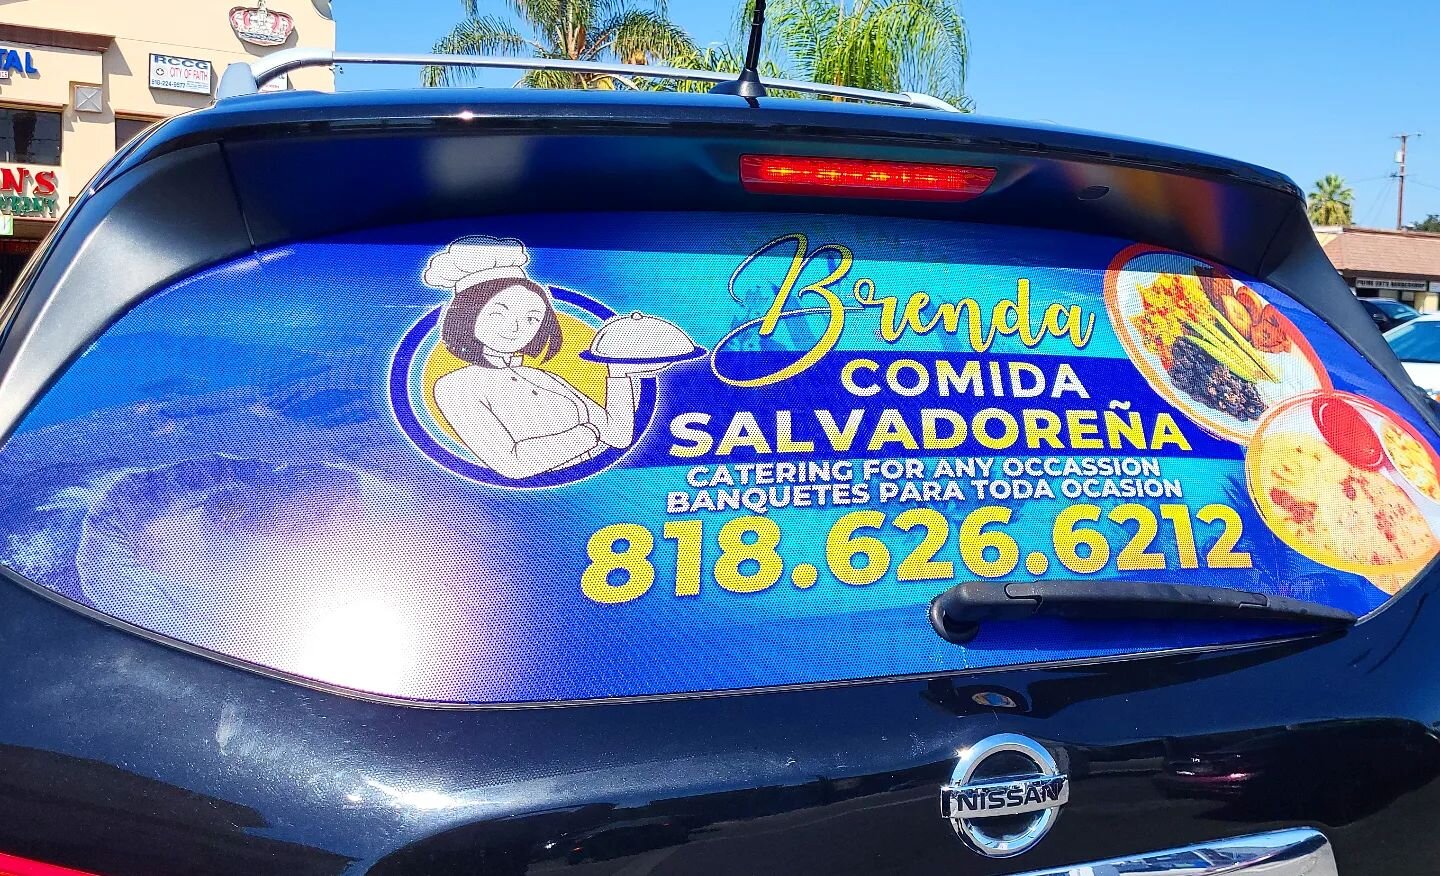 Need Catering Service for your Next Party?
Call Brenda for The Best Authentic Salvadorean Food!

We design, print and install Window Perforated Graphics for your Back Windshield!

#commercialwraps #printedwrap #advertisingwraps #advertising #windowpe